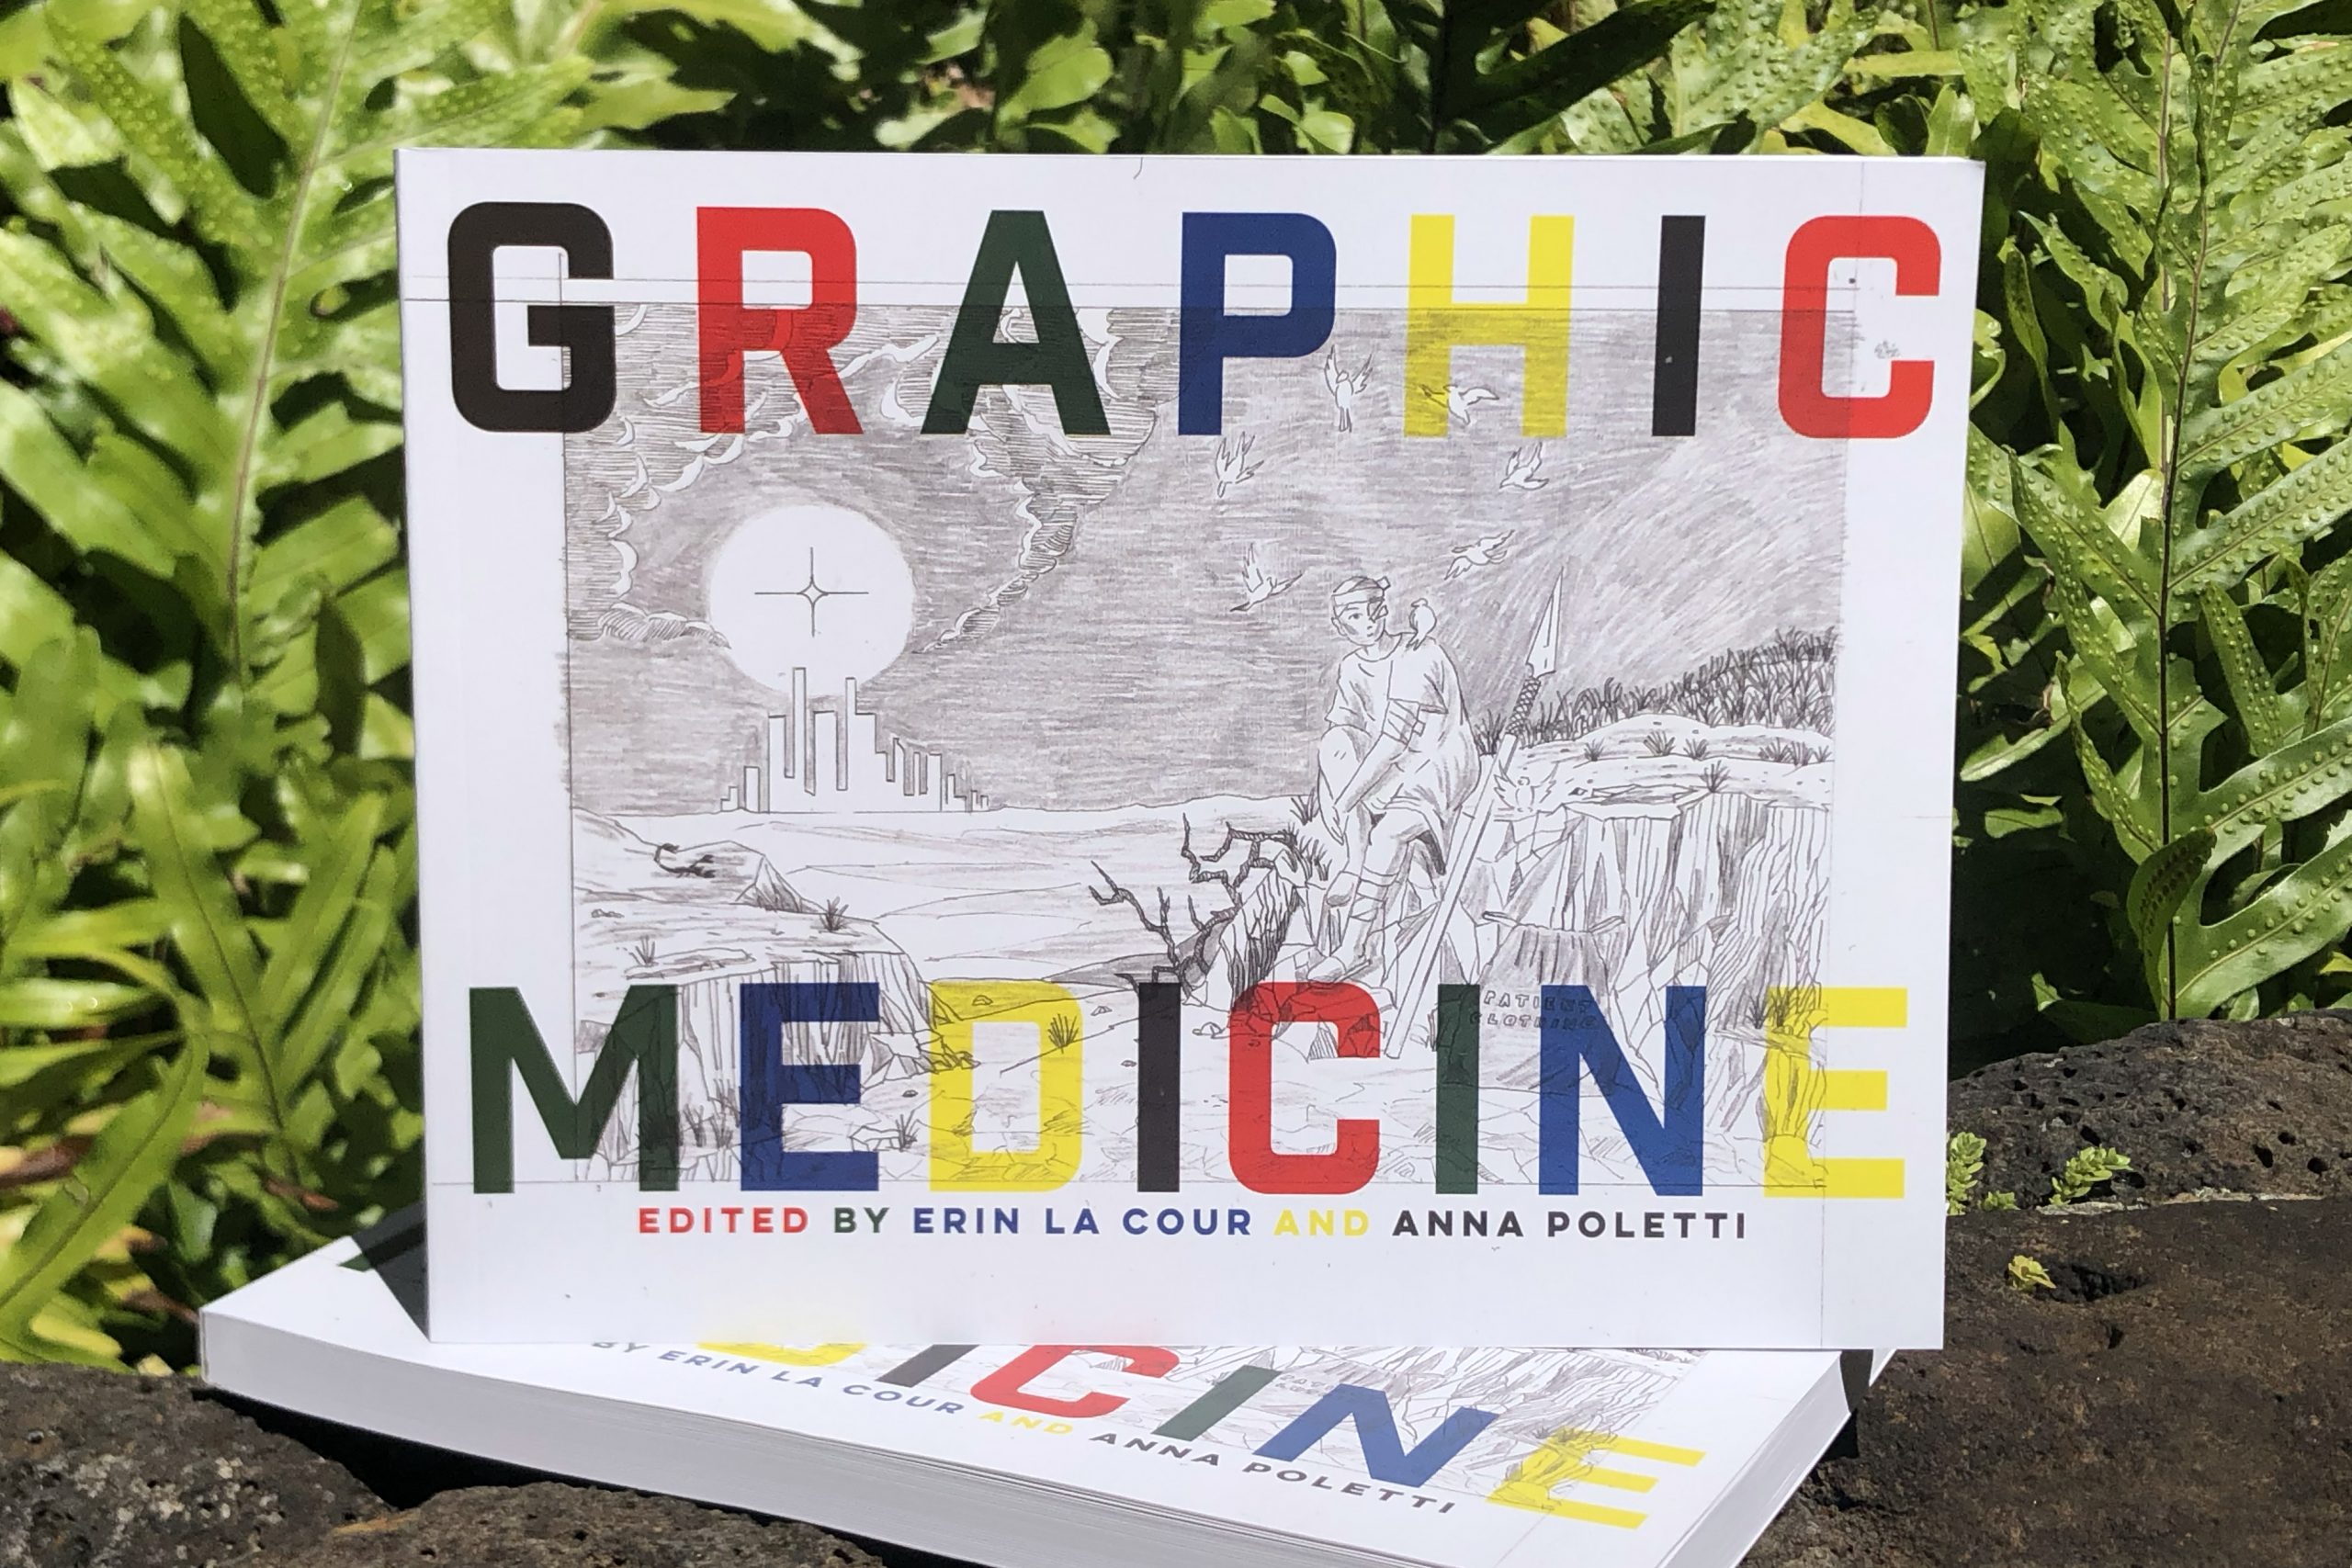 graphic medicine special issue of biography